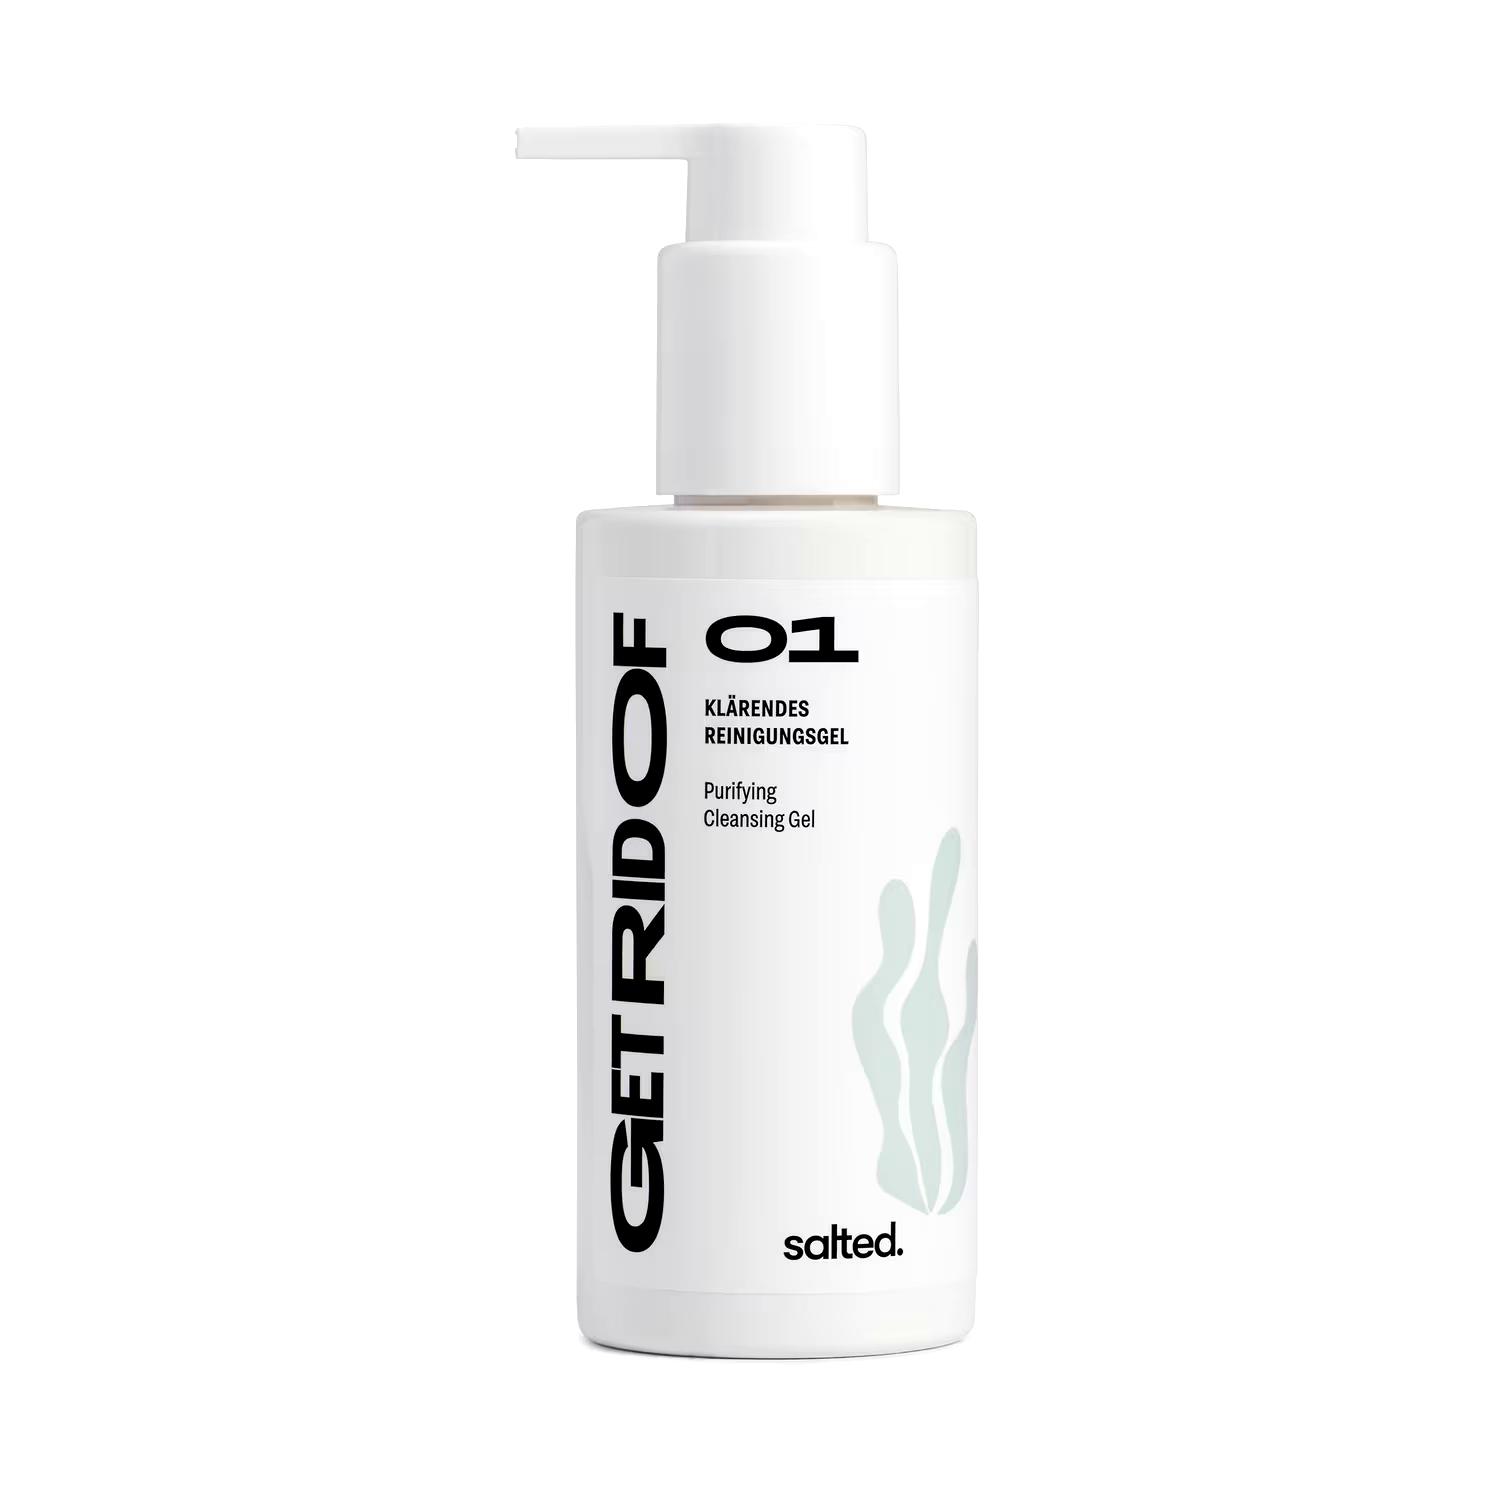 Clearing cleaning gel with a creamy-fresh fragrance